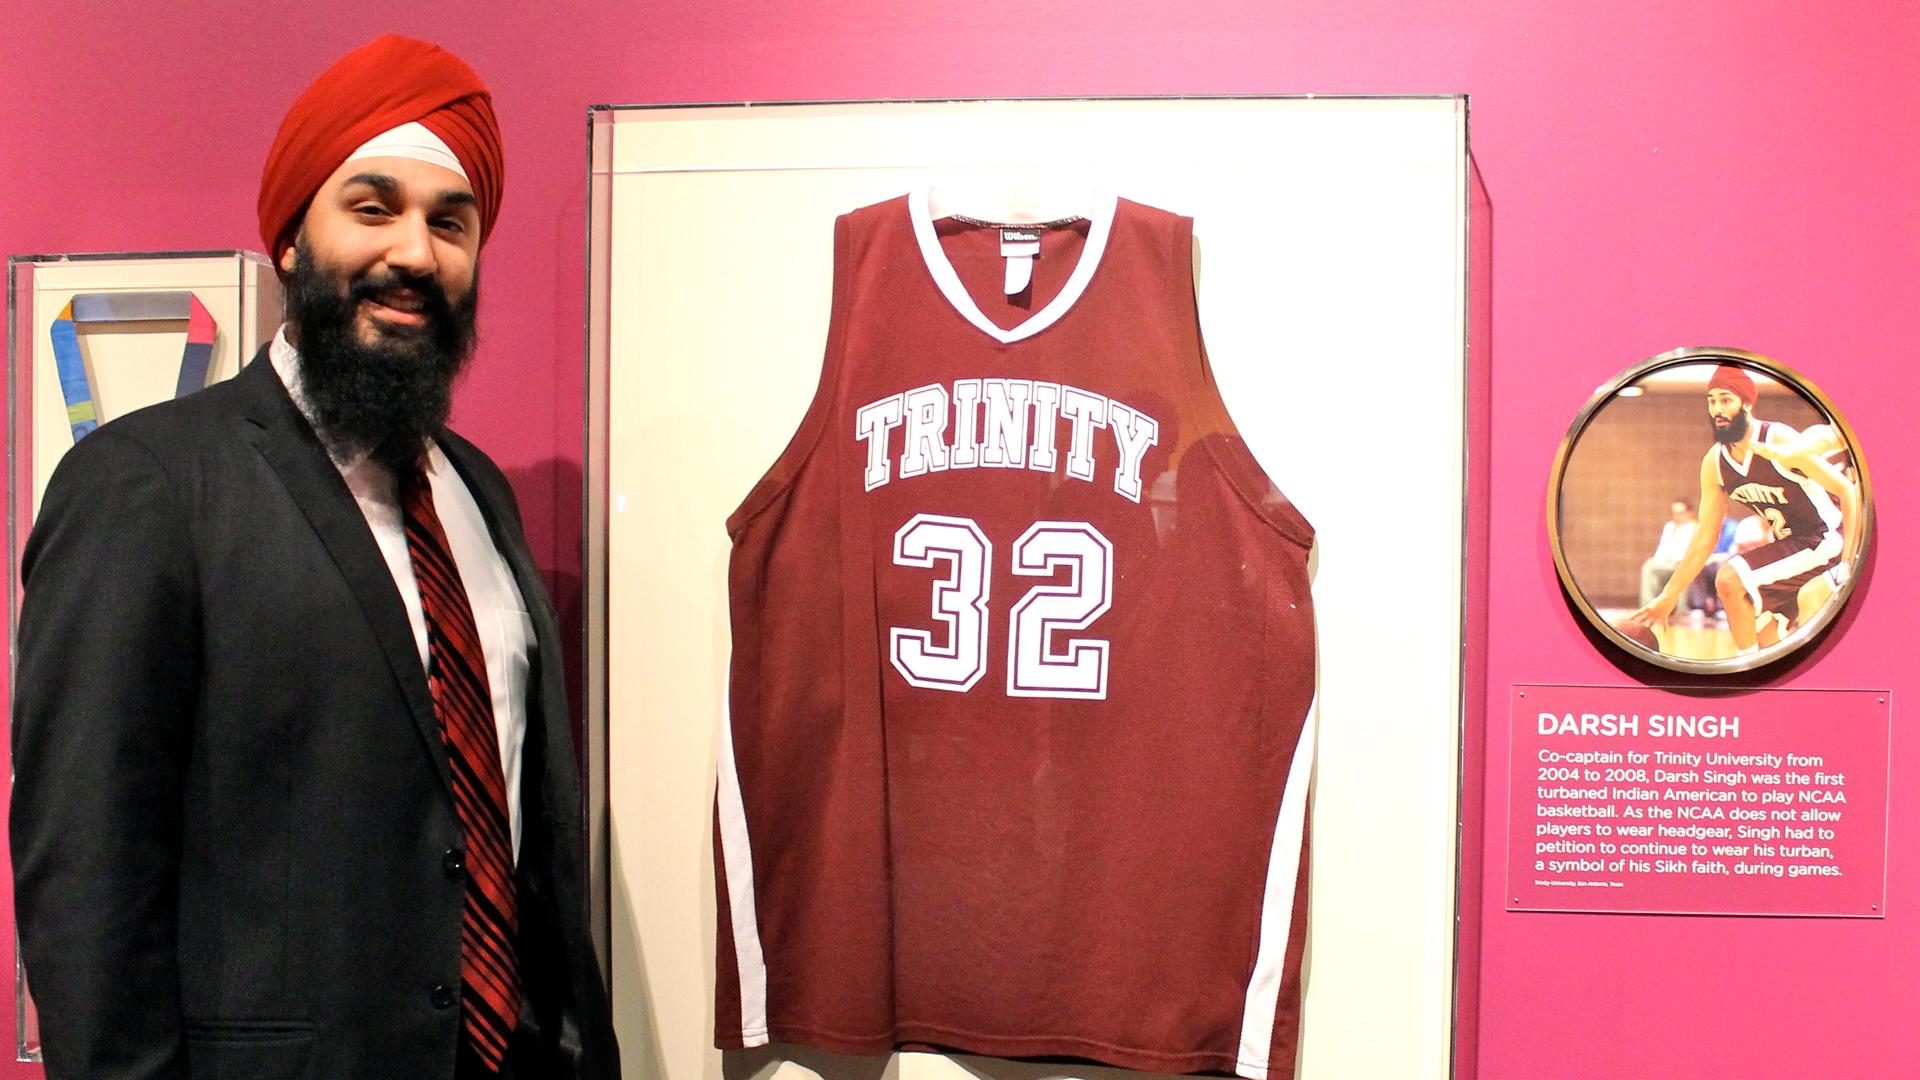 Darsh Preet Singh stands next to his college basketball jersey on display at the Smithsonian's National Museum of Natural History, part of an exhibition on Indian-Americans. Singh is the first Sikh American to play basketball in the NCAA while wearing his